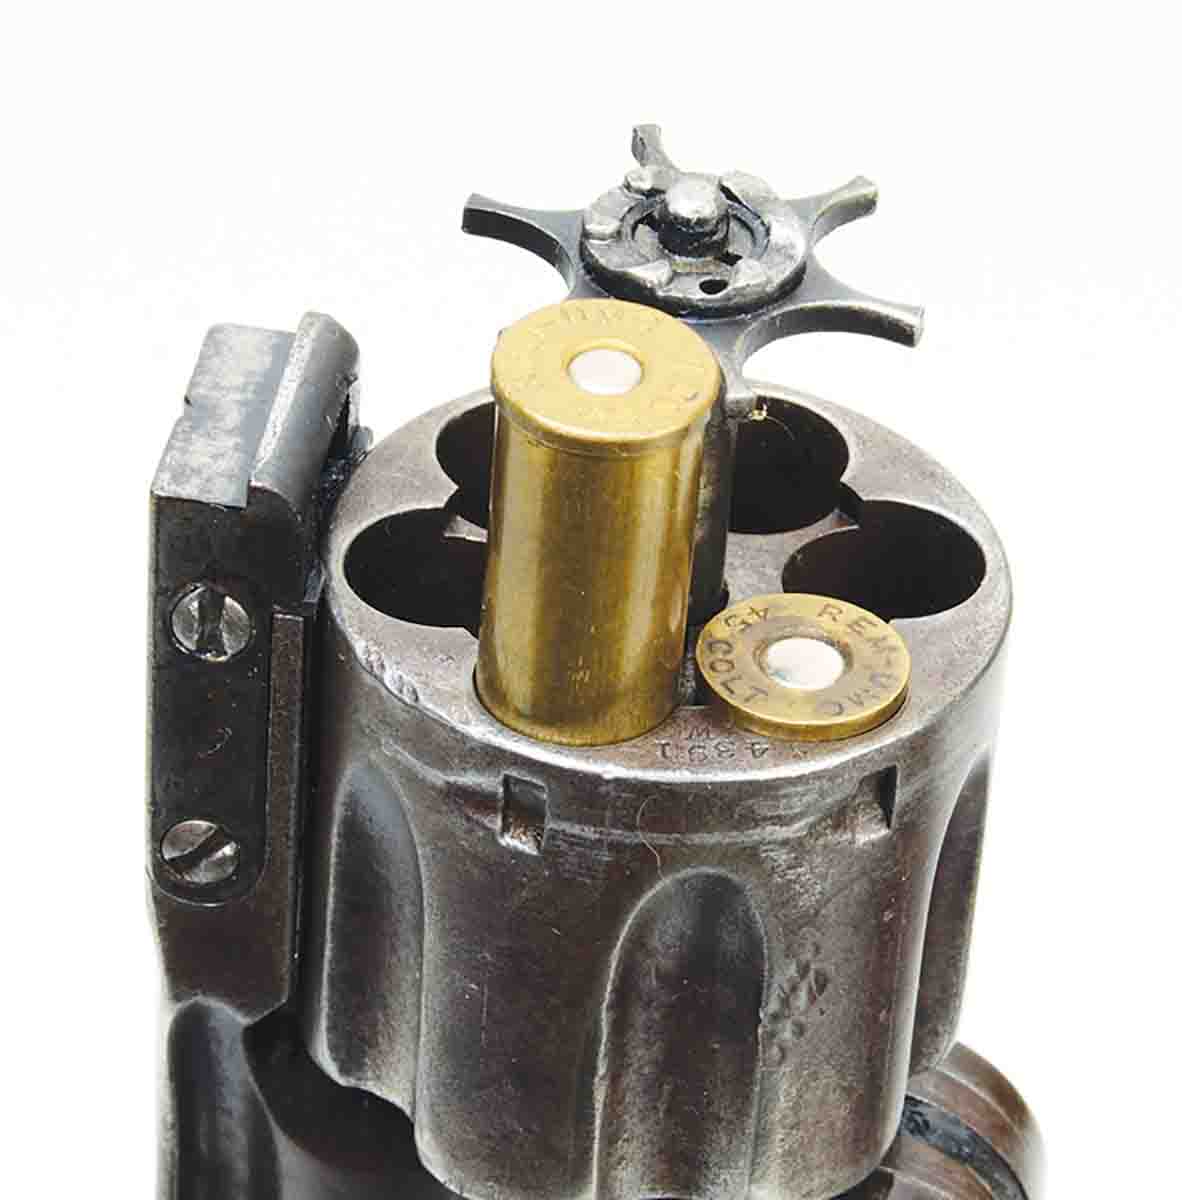 The short .45 Colt rounds with .502-inch rim diameters will not function properly in the star type extractors of Smith & Wesson Model No. 3s.